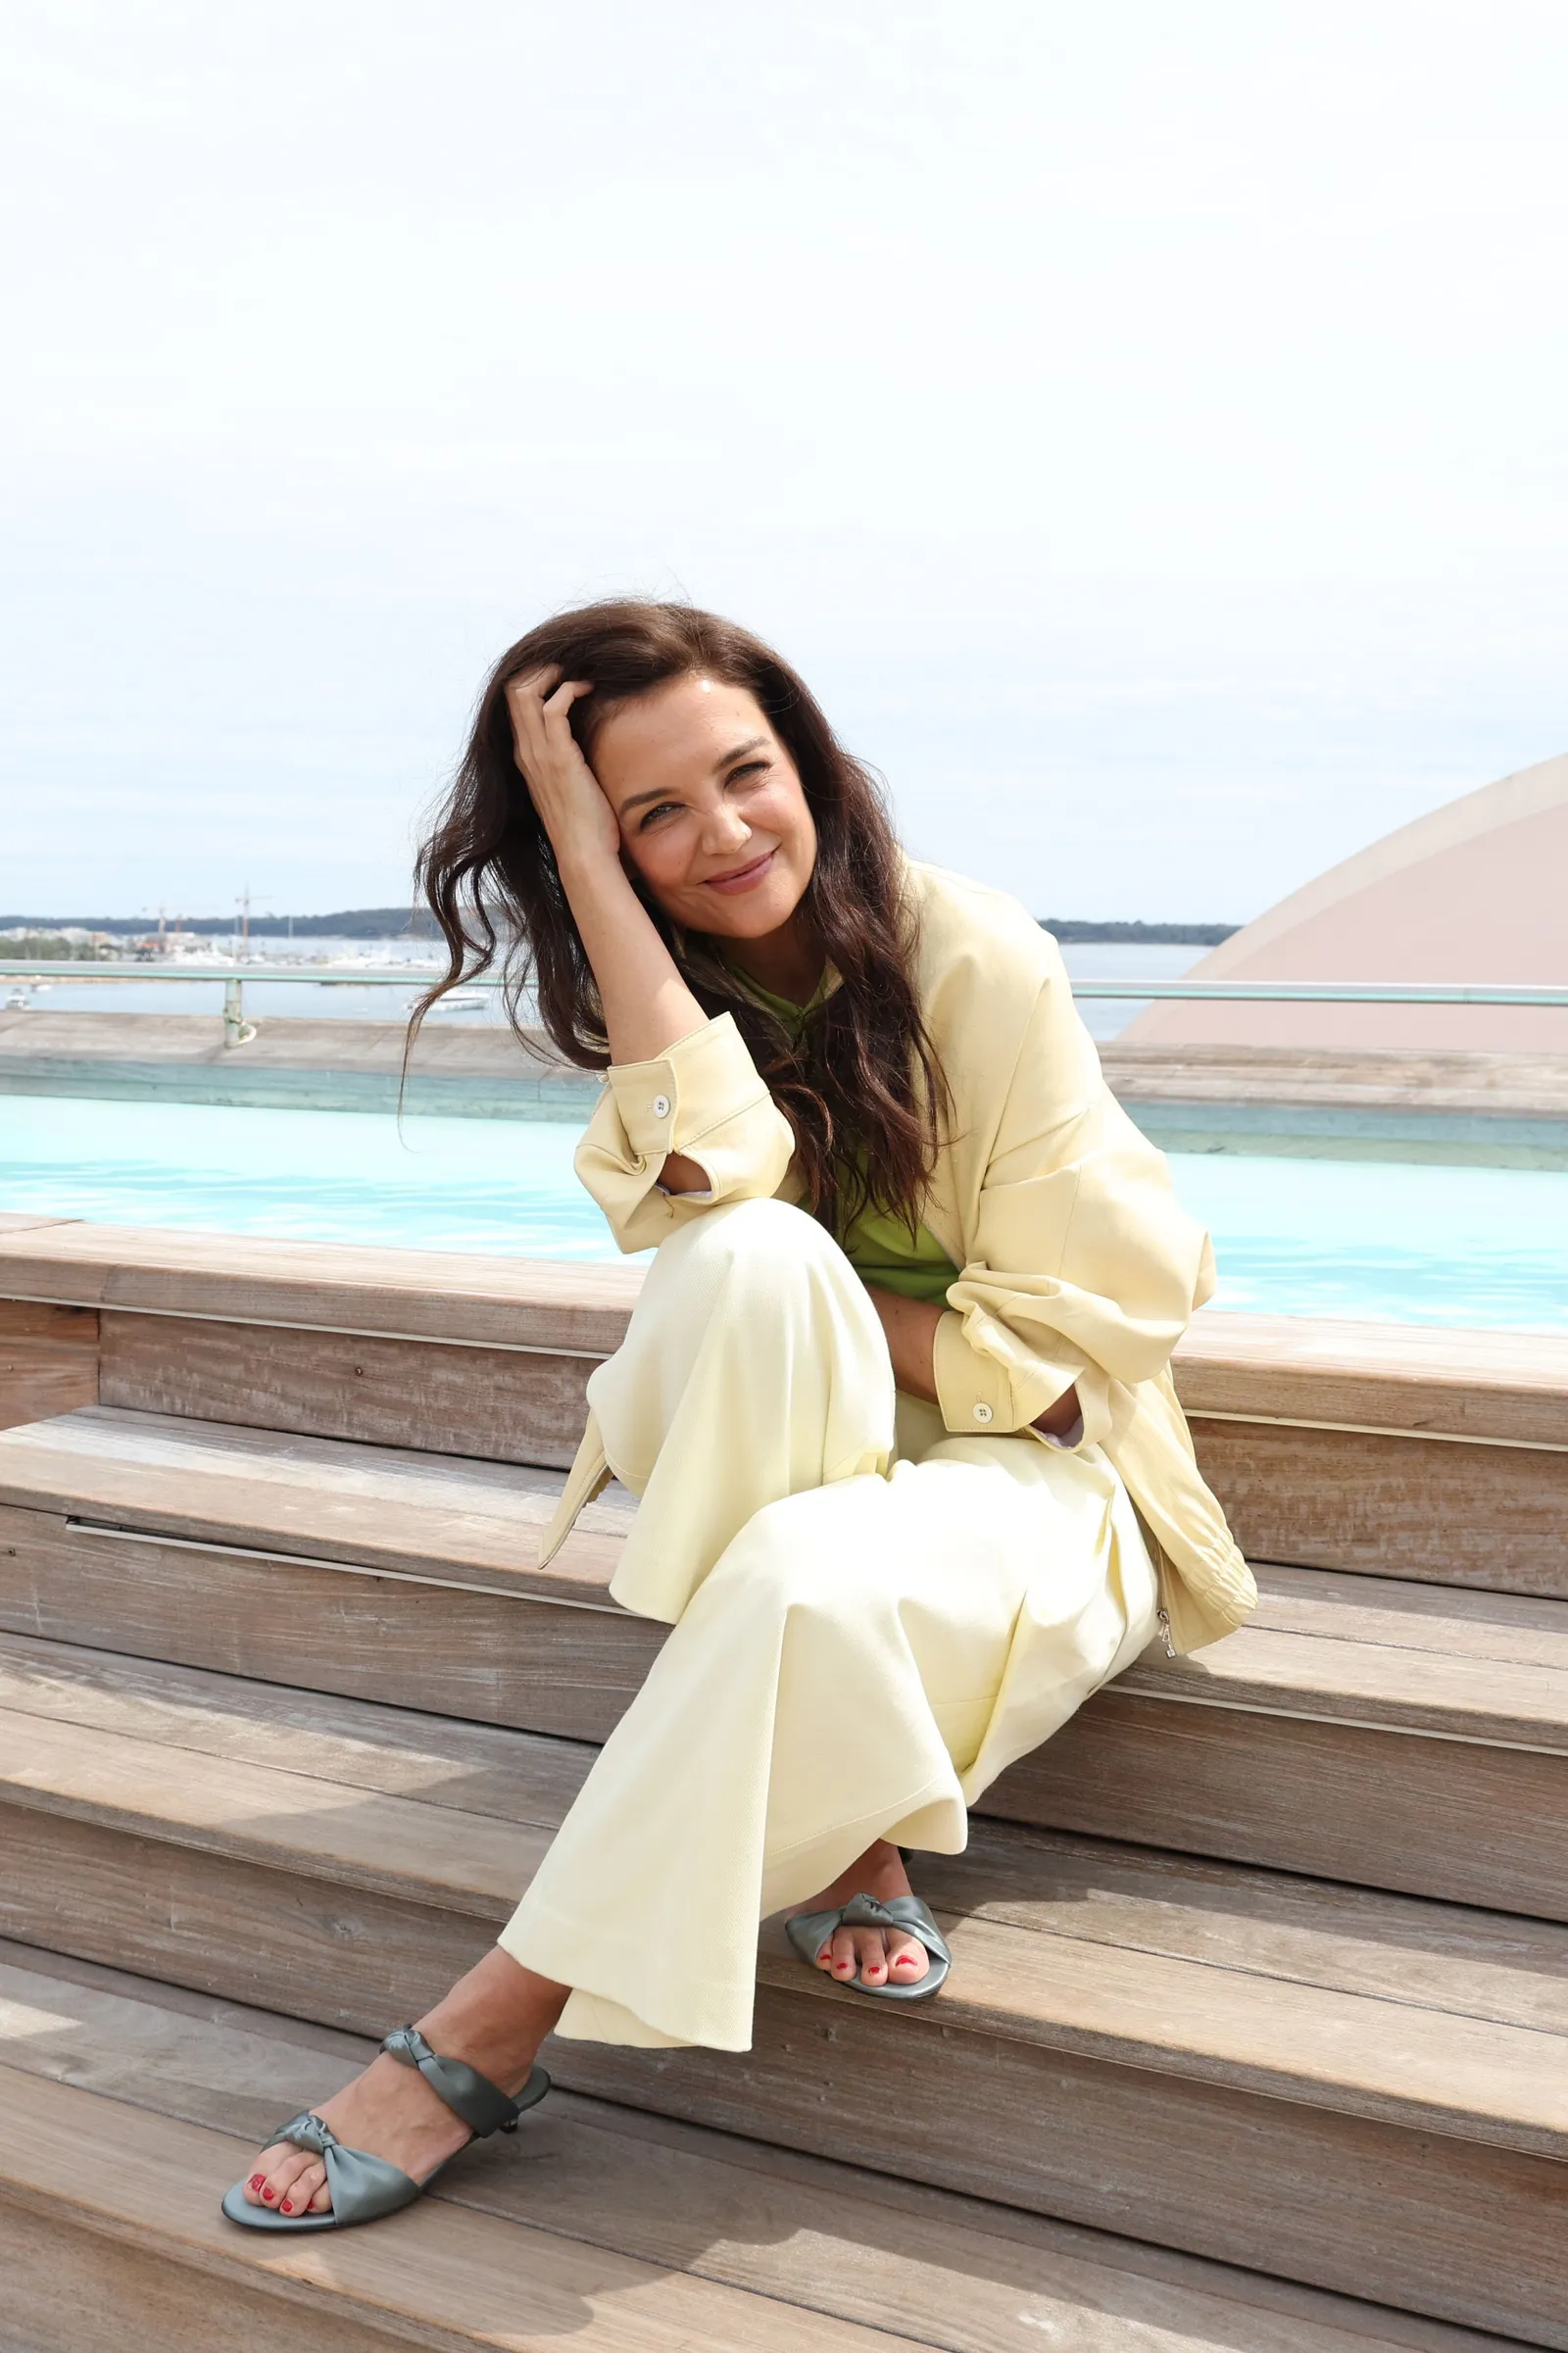 Katie Holmes / Fot. Getty Images